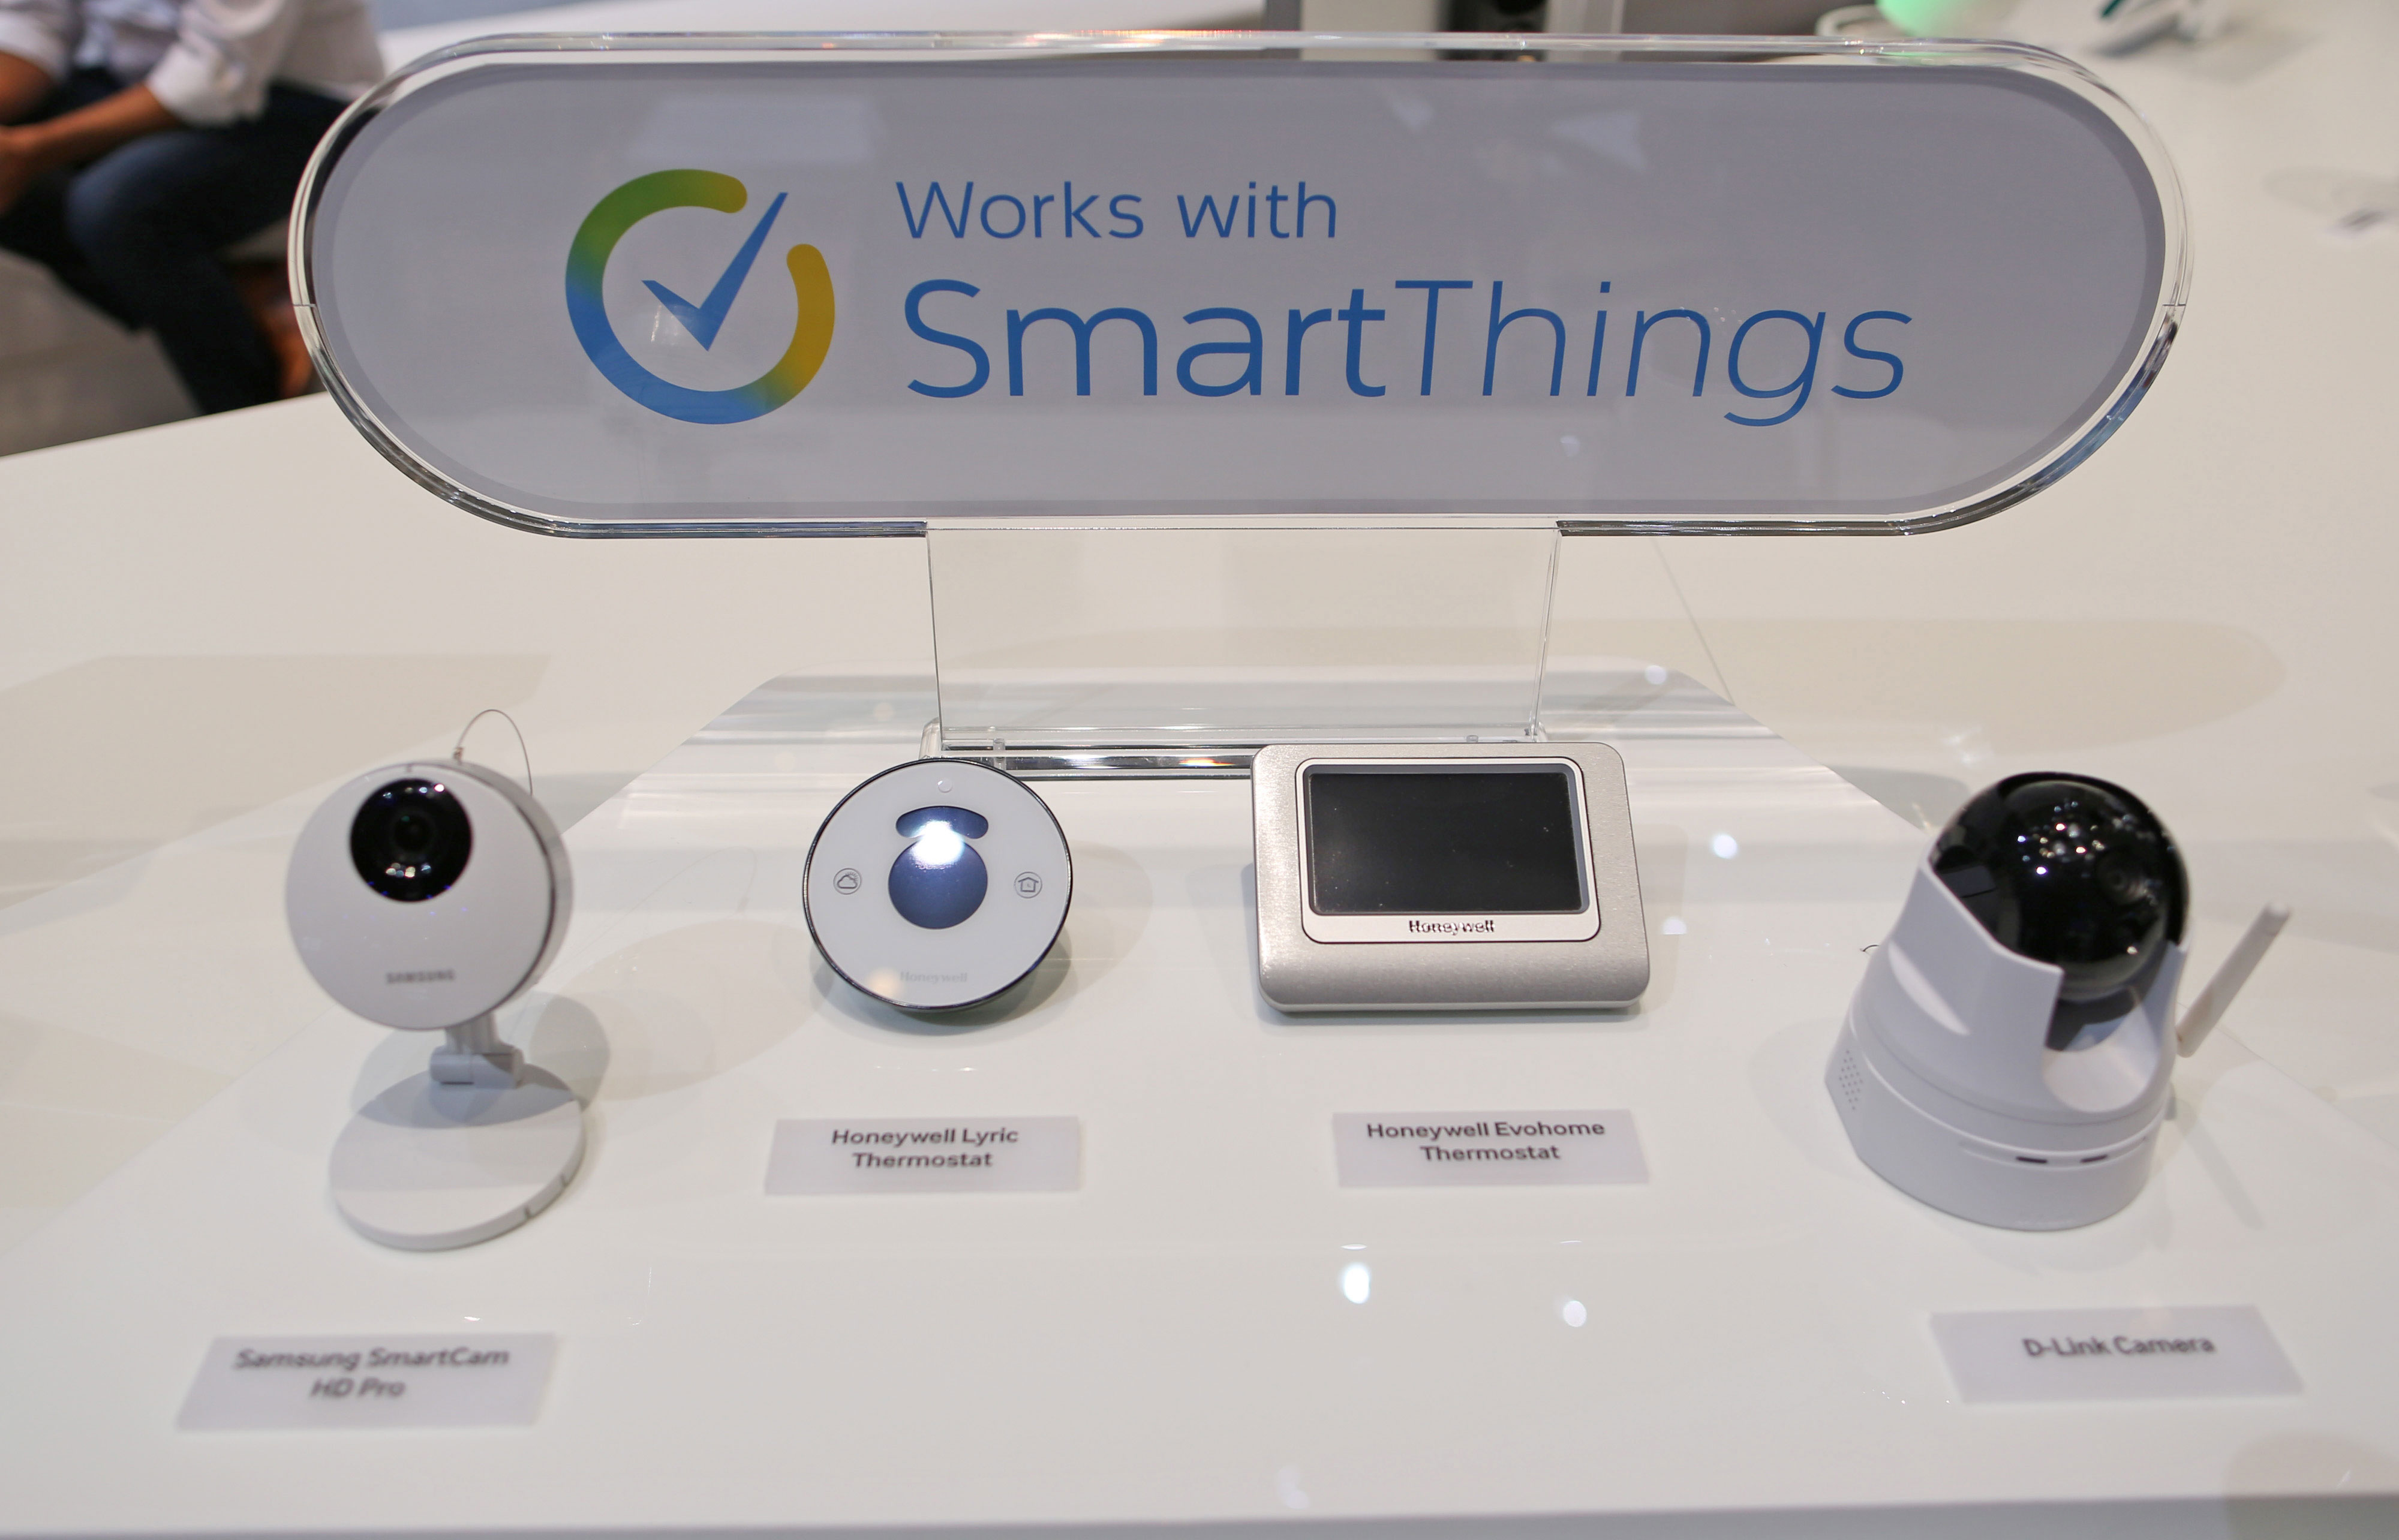 Samsung Smart Things devices on display at the company's stand during previews for the IFA International Consumer Electronics Show in Berlin.
